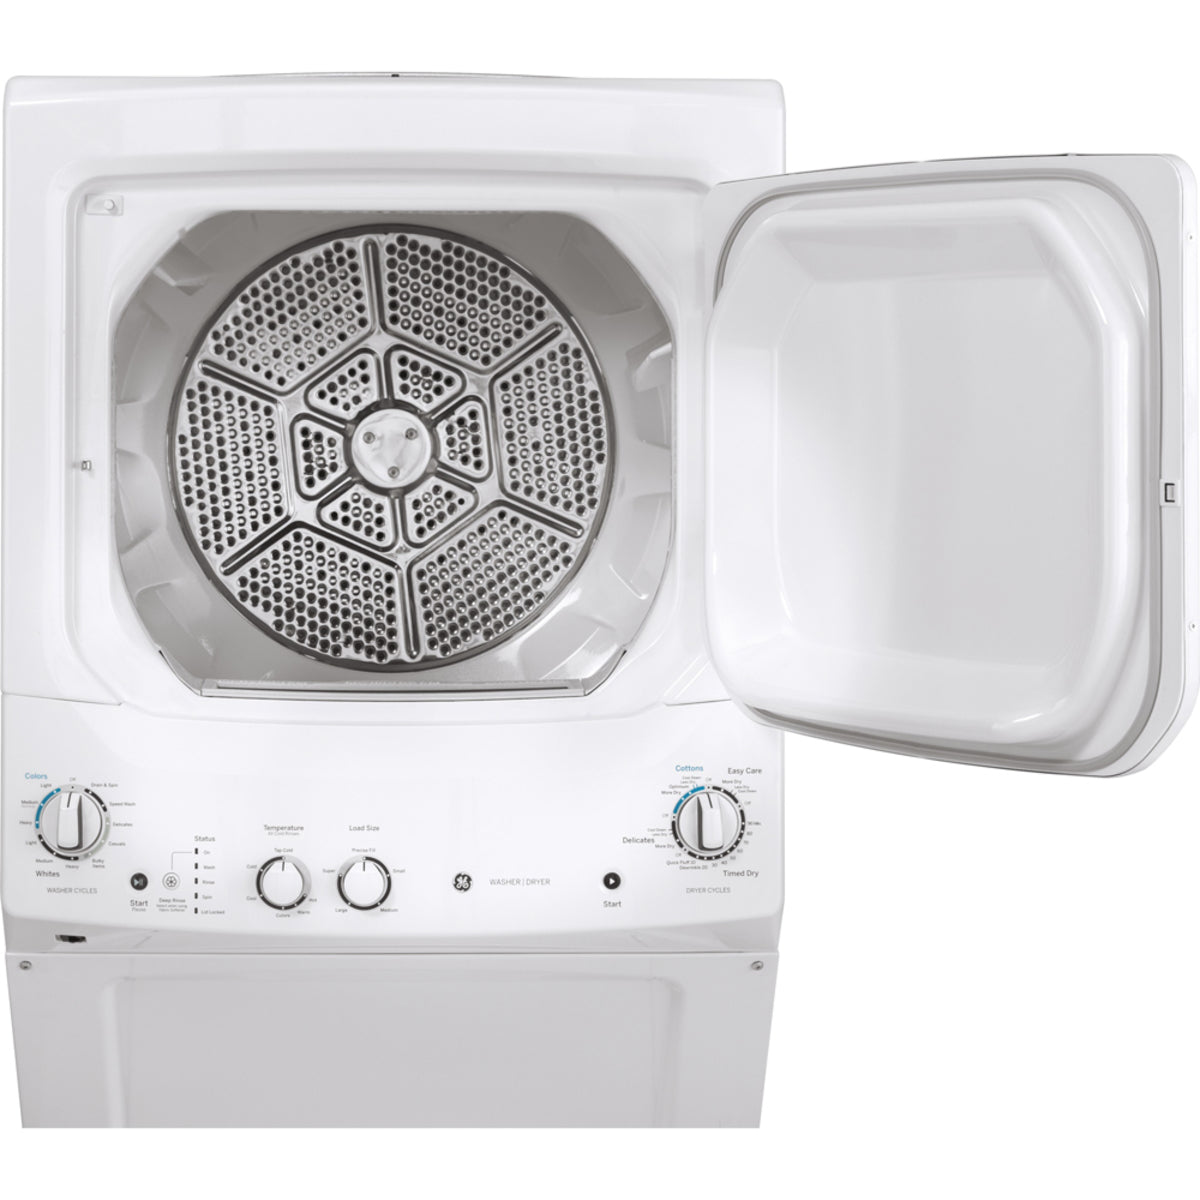 GE - 2.6 cu. ft. Washer and 4.4 cu. ft. Electric Dryer Unitized Laundry Centre in White - GUD24ESMMWW